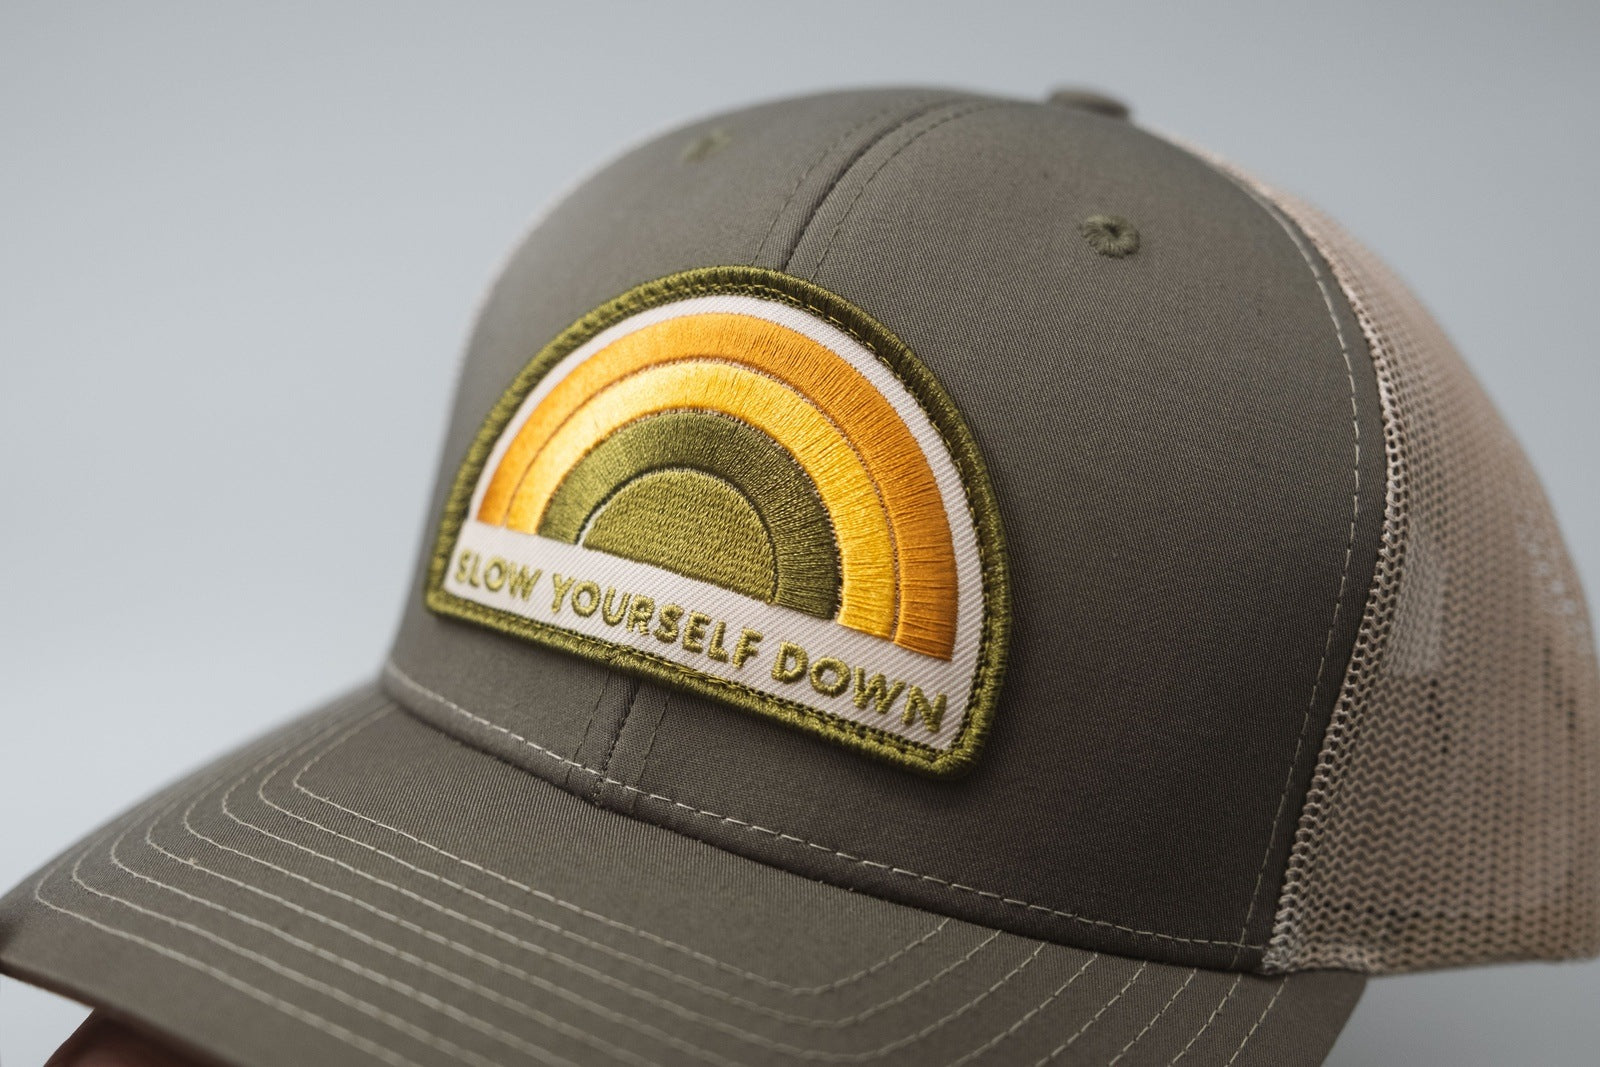 Recycled Rainbow Trucker Hat Hats - Slow Yourself Down